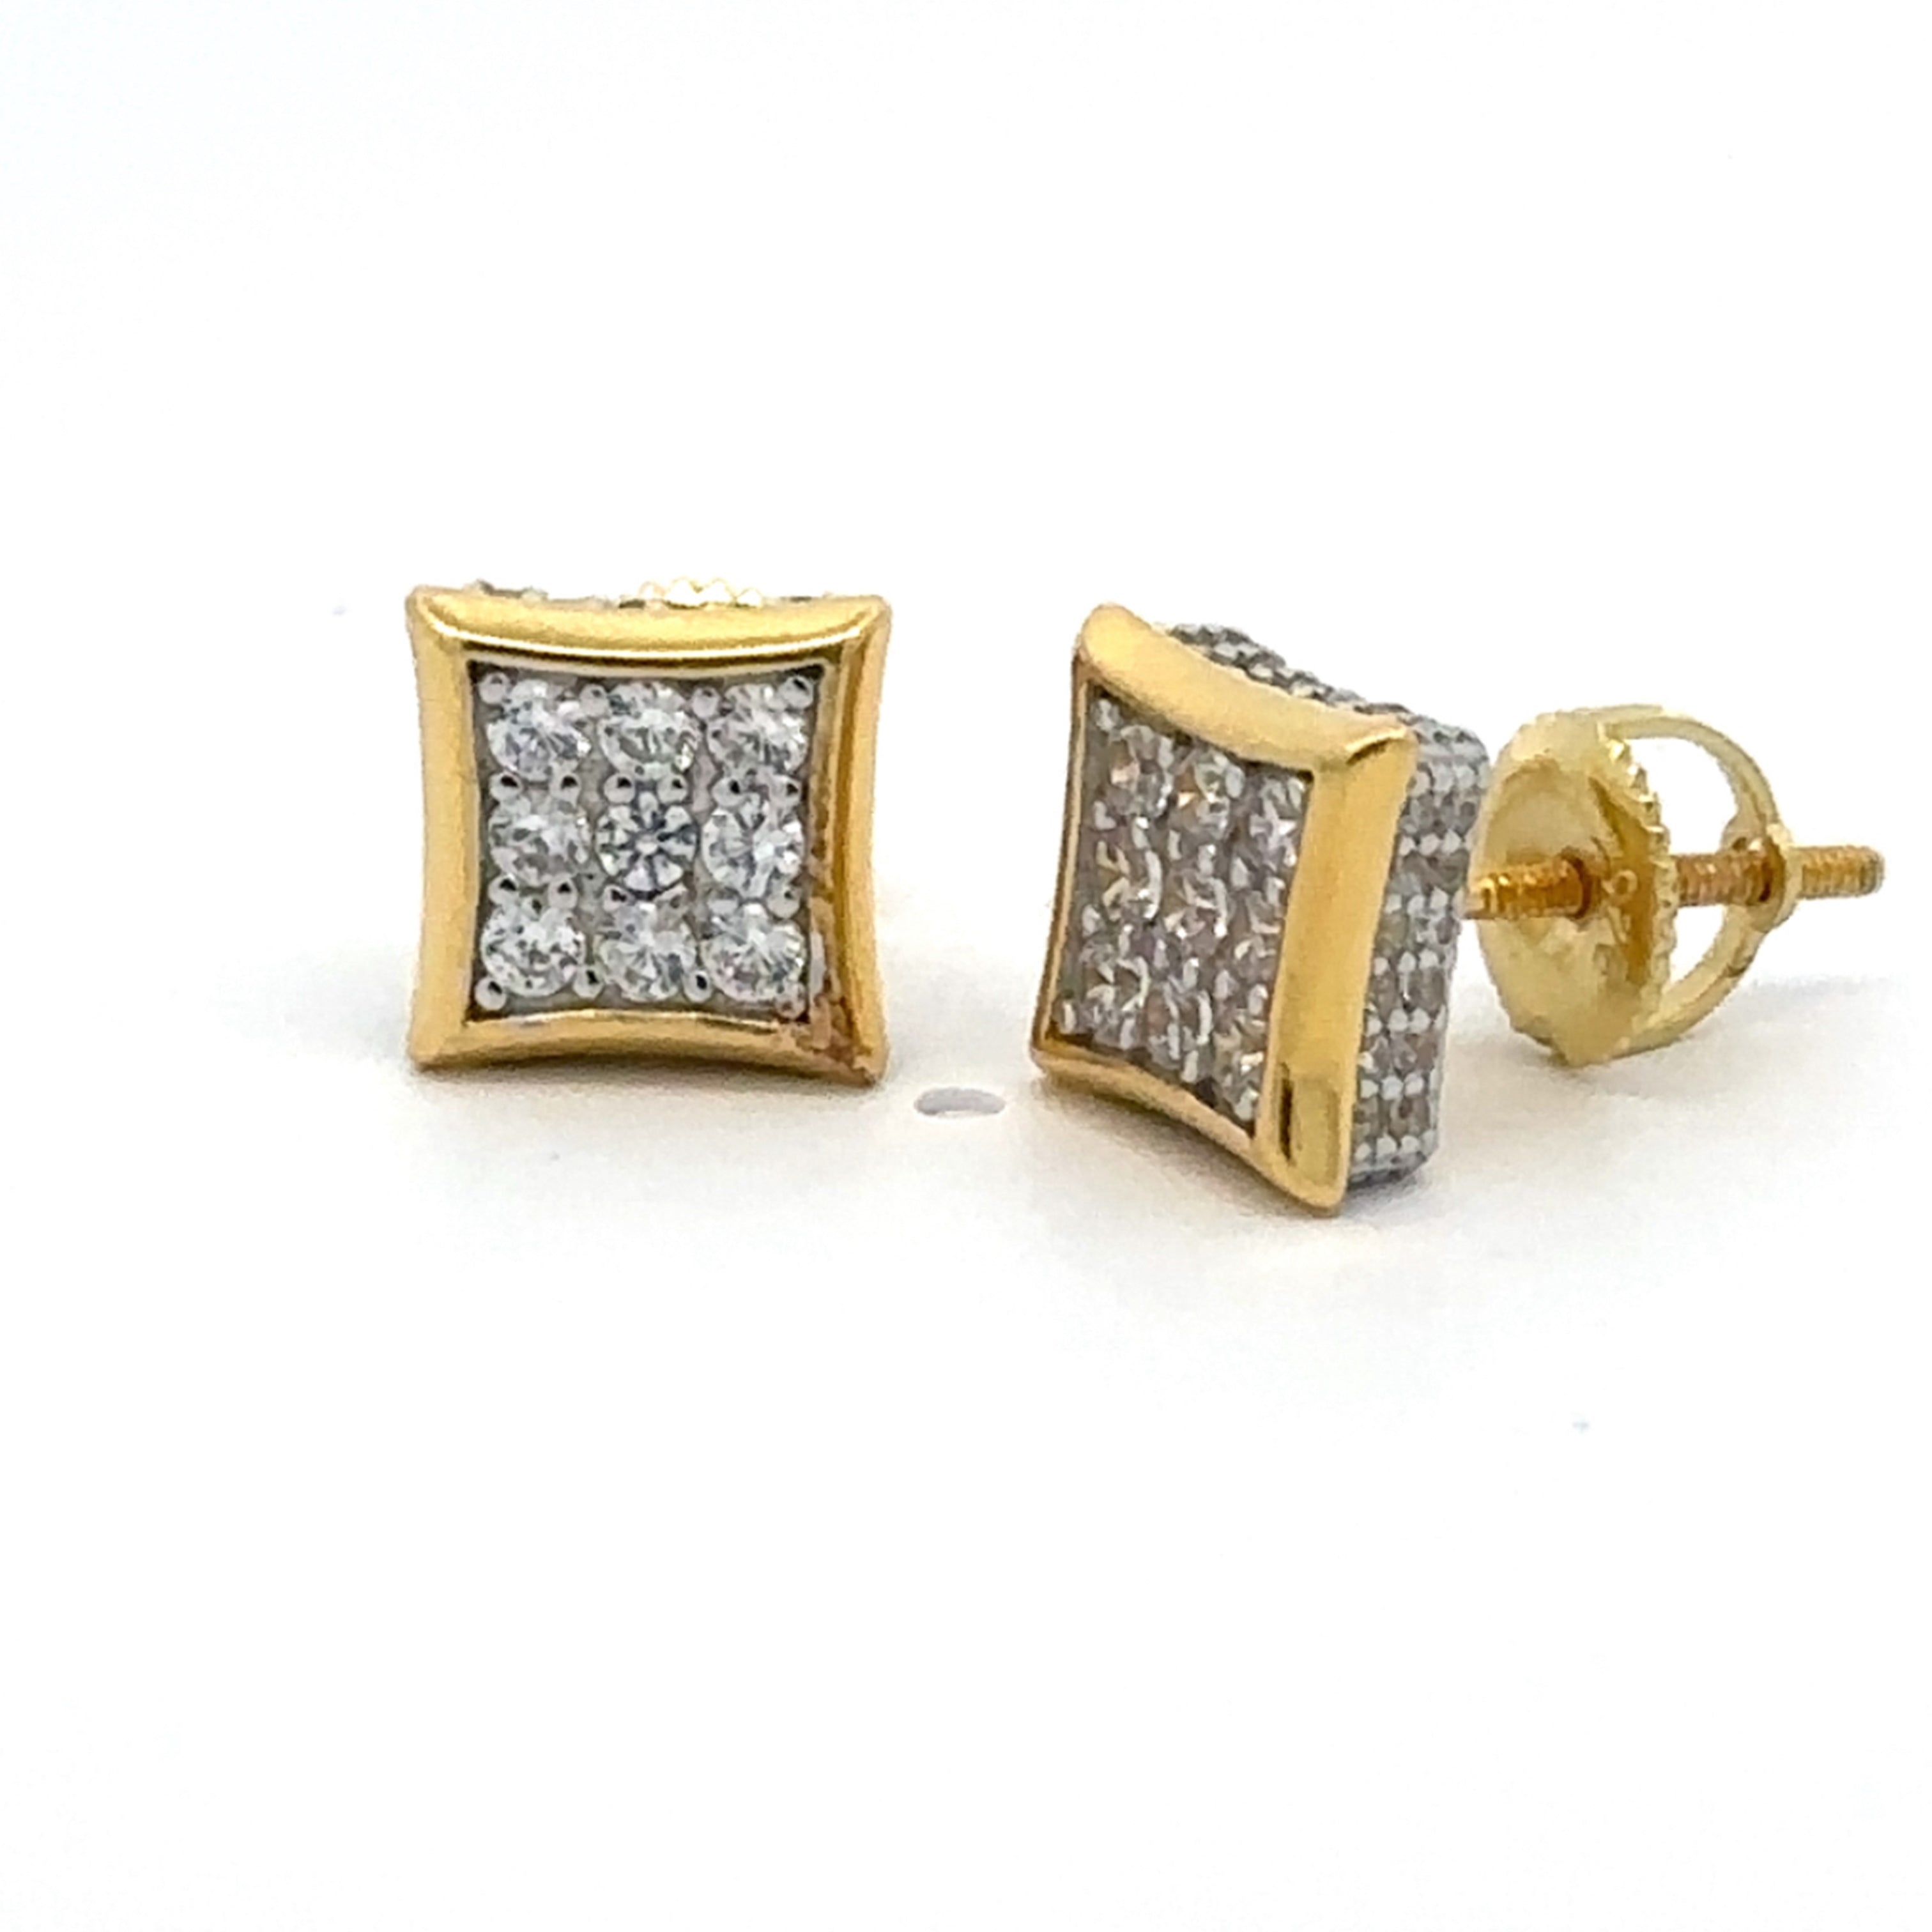 NIVALIS 925 CZ GOLD ICED OUT EARRINGS | 9219542